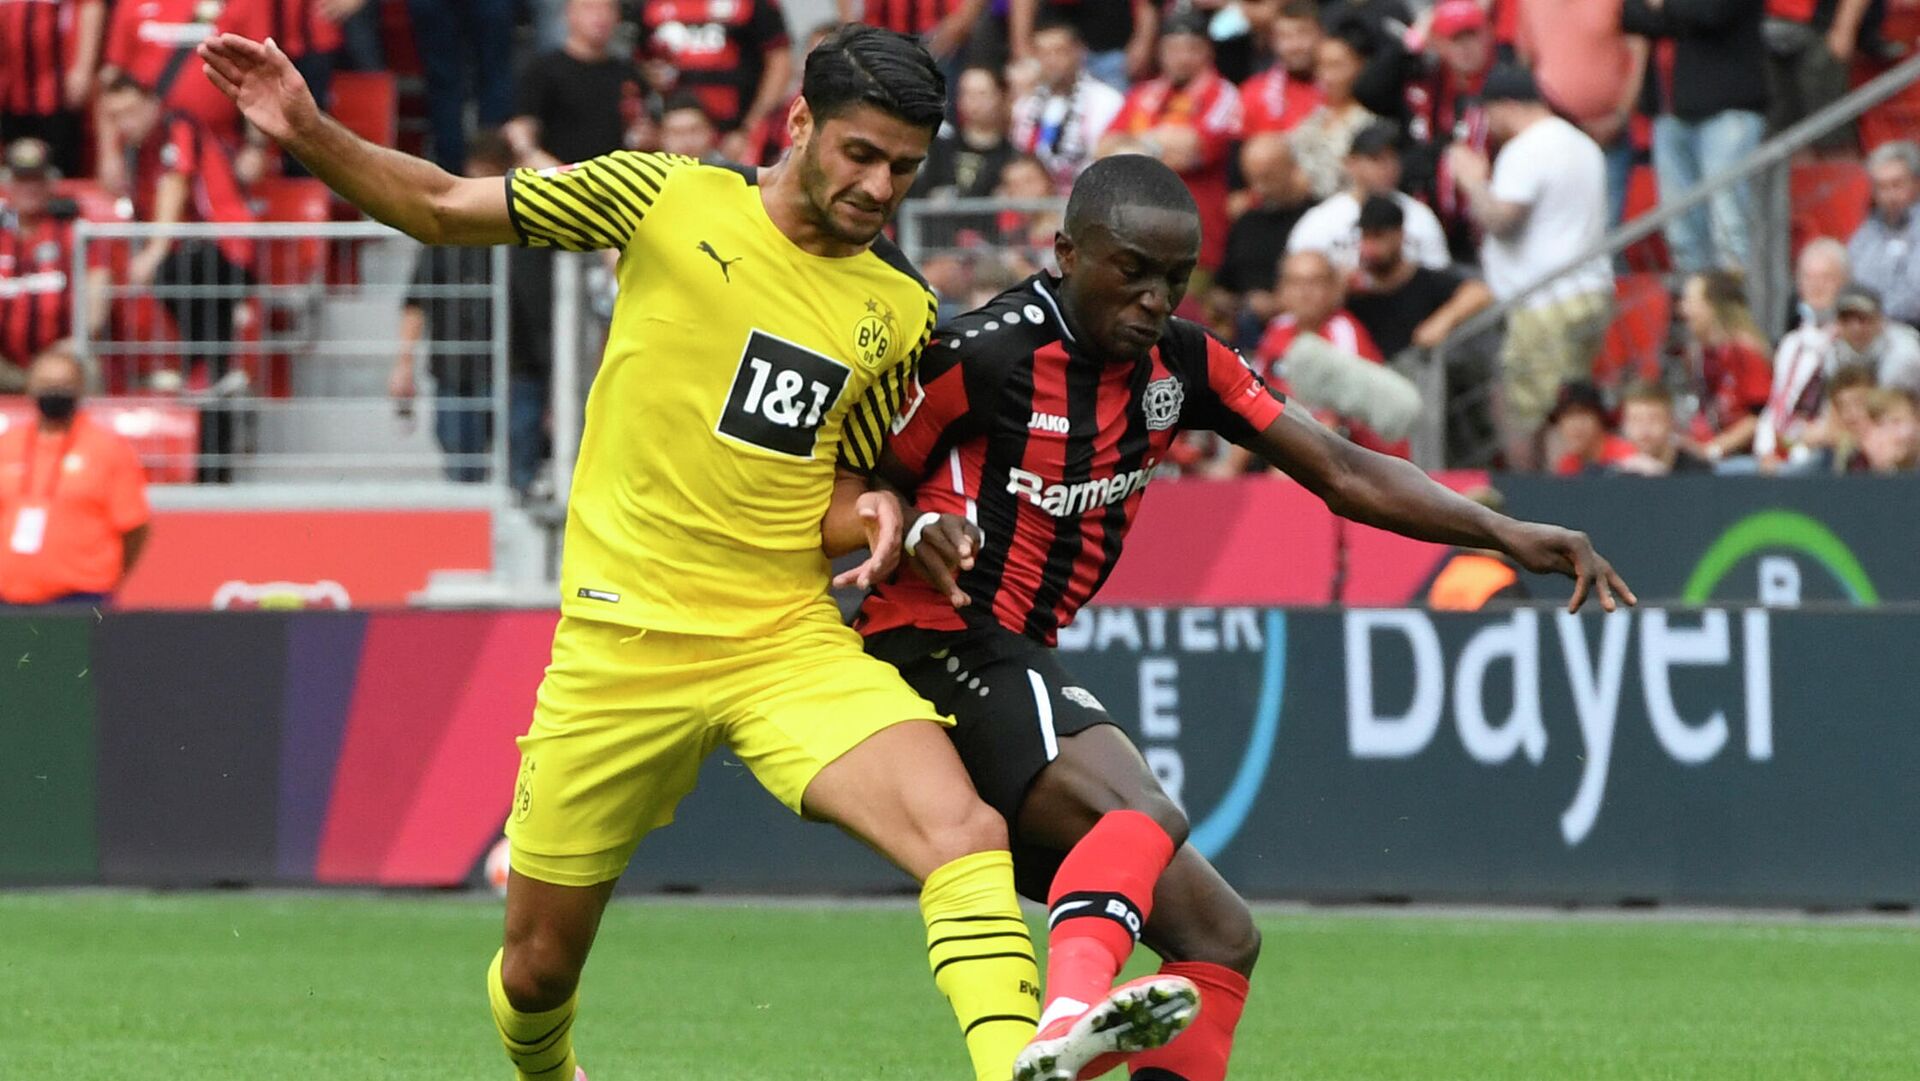 Dortmund's German midfielder Mahmoud Dahoud (L) and Leverkusen's French forward Moussa Diaby vie for the ball during the German first division Bundesliga football match between Bayer 04 Leverkusen and Borussia Dortmund in Leverkusen, western Germany, on September 11, 2021. (Photo by Roberto Pfeil / AFP) / DFL REGULATIONS PROHIBIT ANY USE OF PHOTOGRAPHS AS IMAGE SEQUENCES AND/OR QUASI-VIDEO - РИА Новости, 1920, 11.09.2021